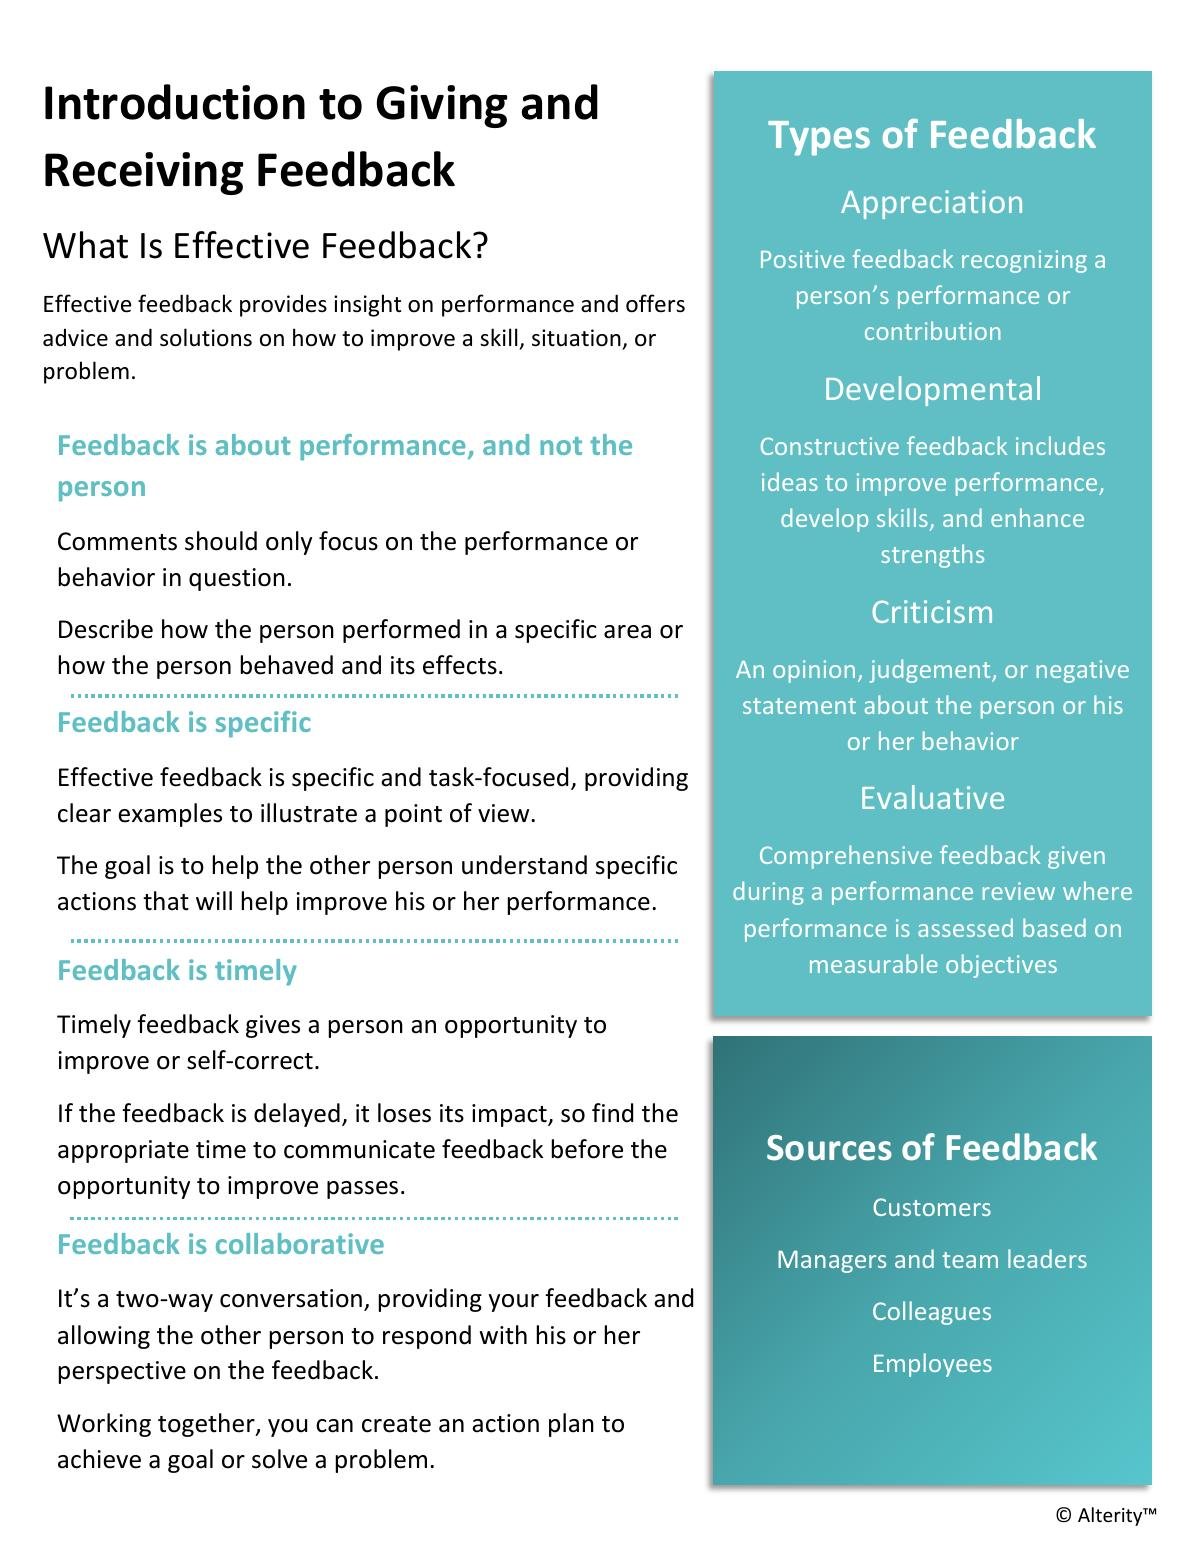 Introduction to Giving and Receiving Feedback